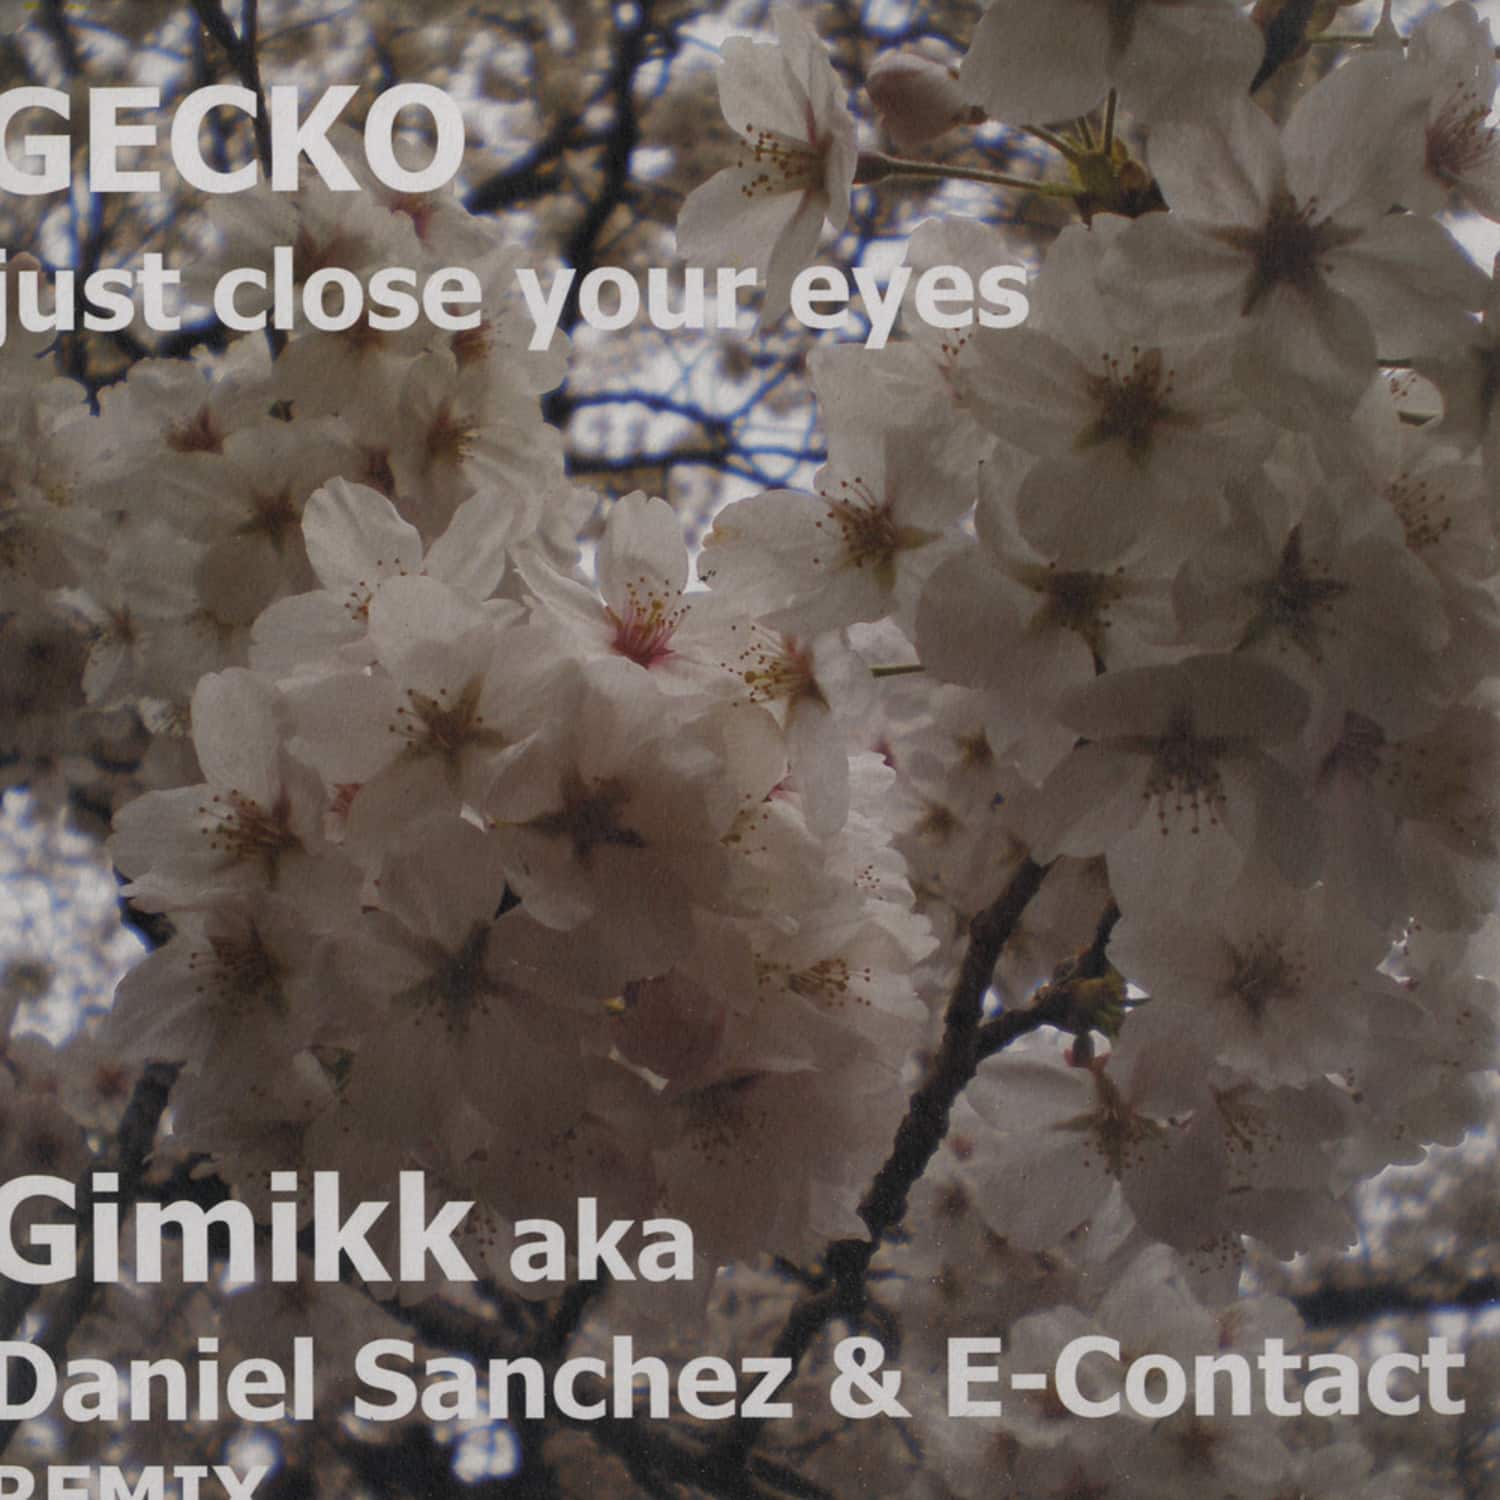 Gecko - JUST CLOSE YOUR EYES 2.8